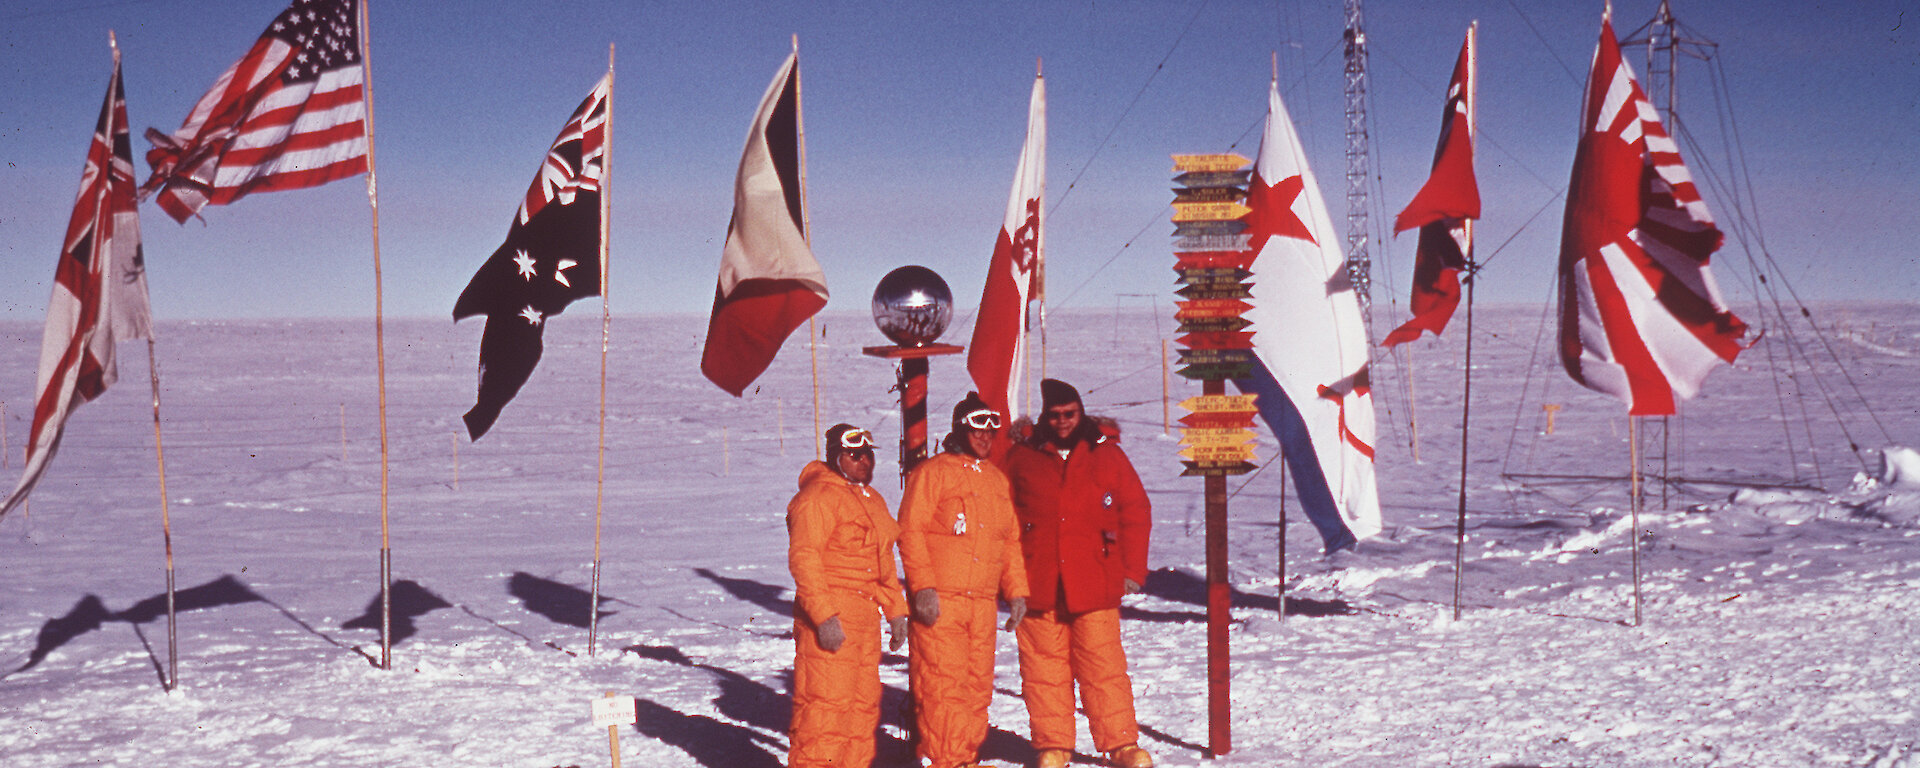 Three men standing at South Pole marker with row of international flags behind